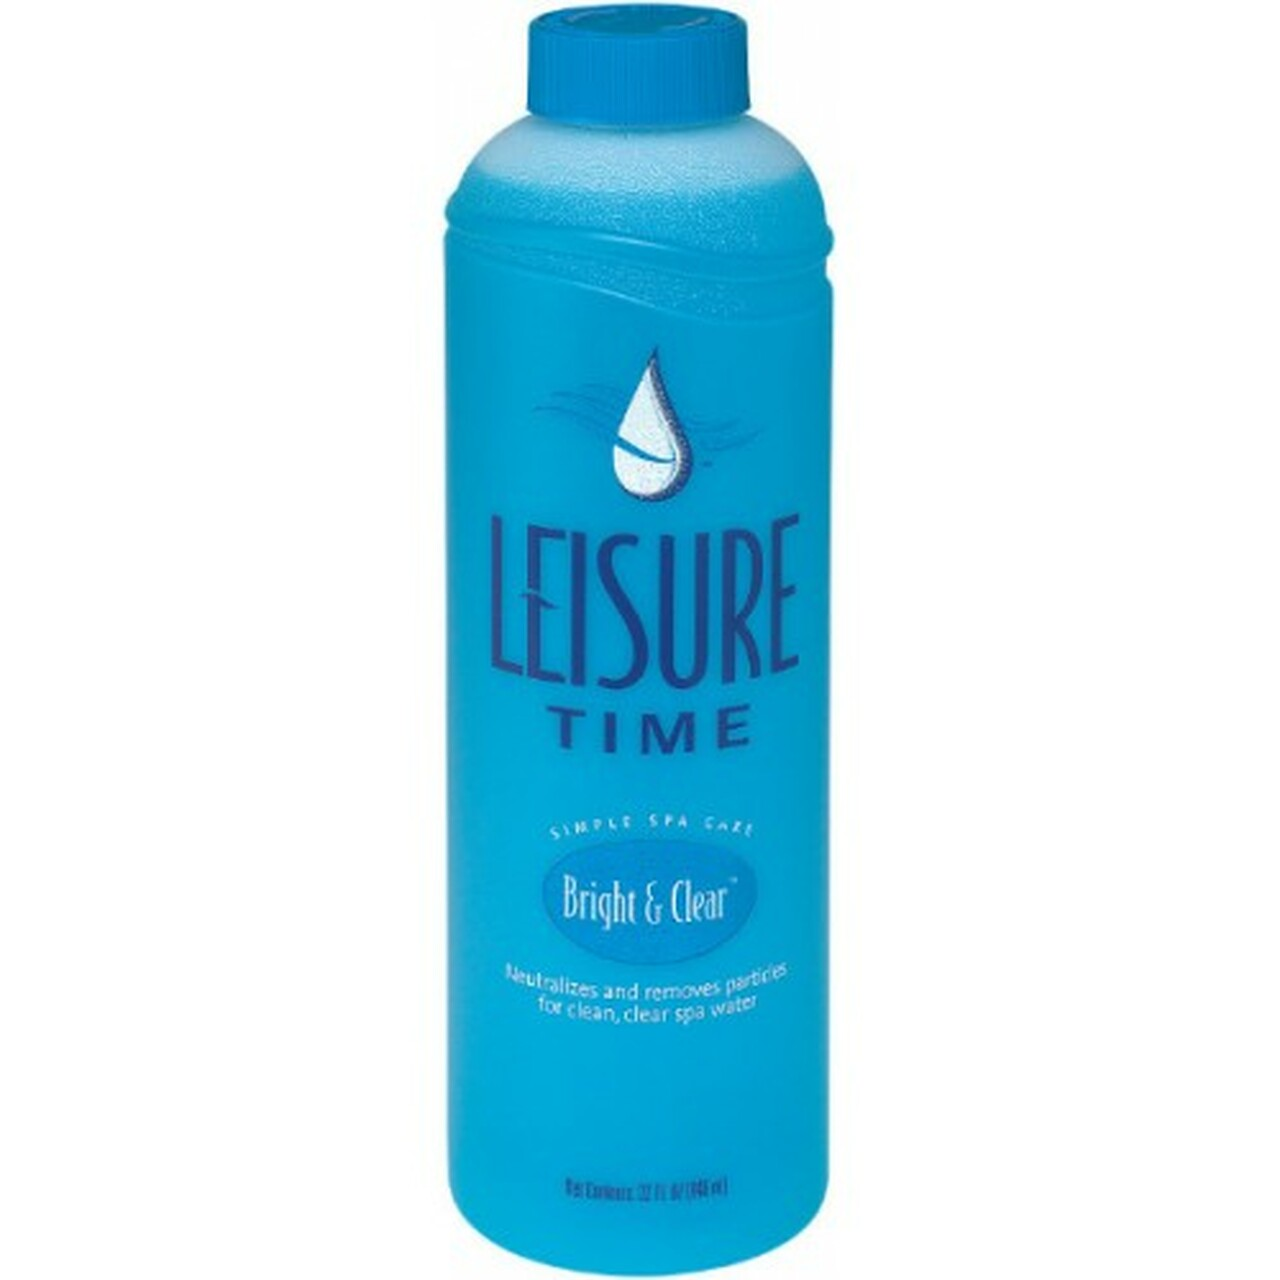 Leisure Time Cleanser